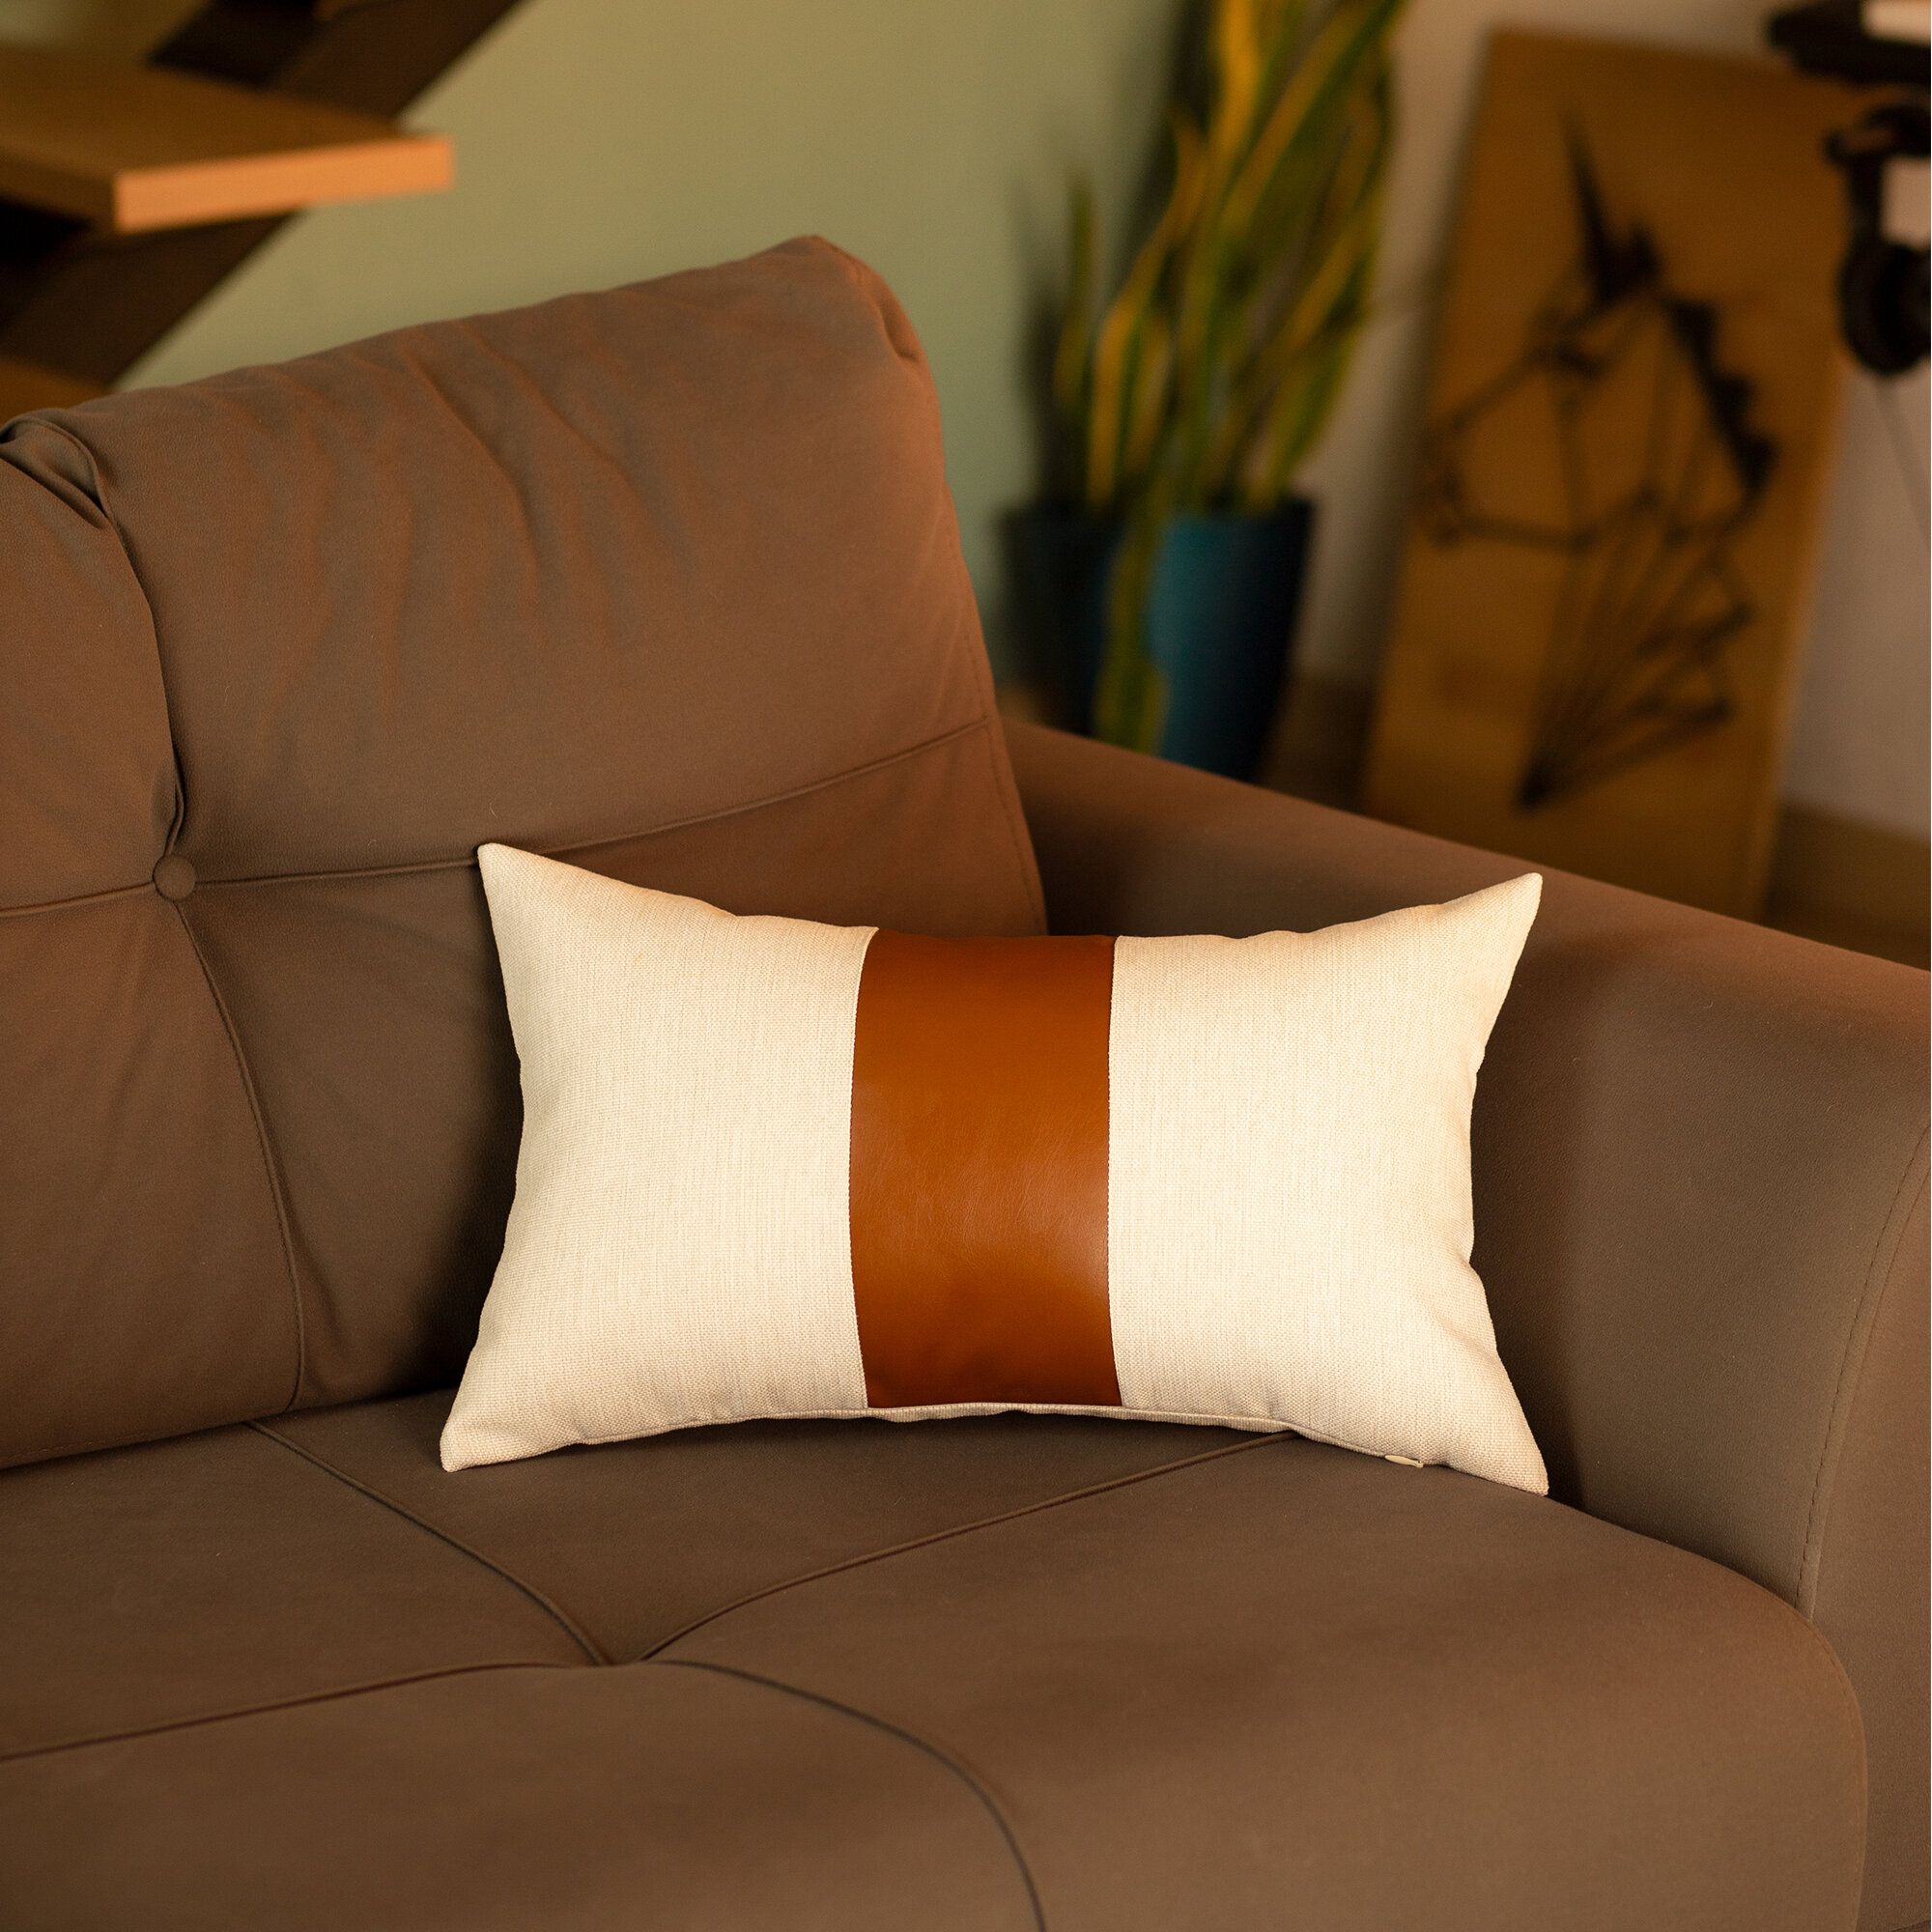 tan leather pillow cover